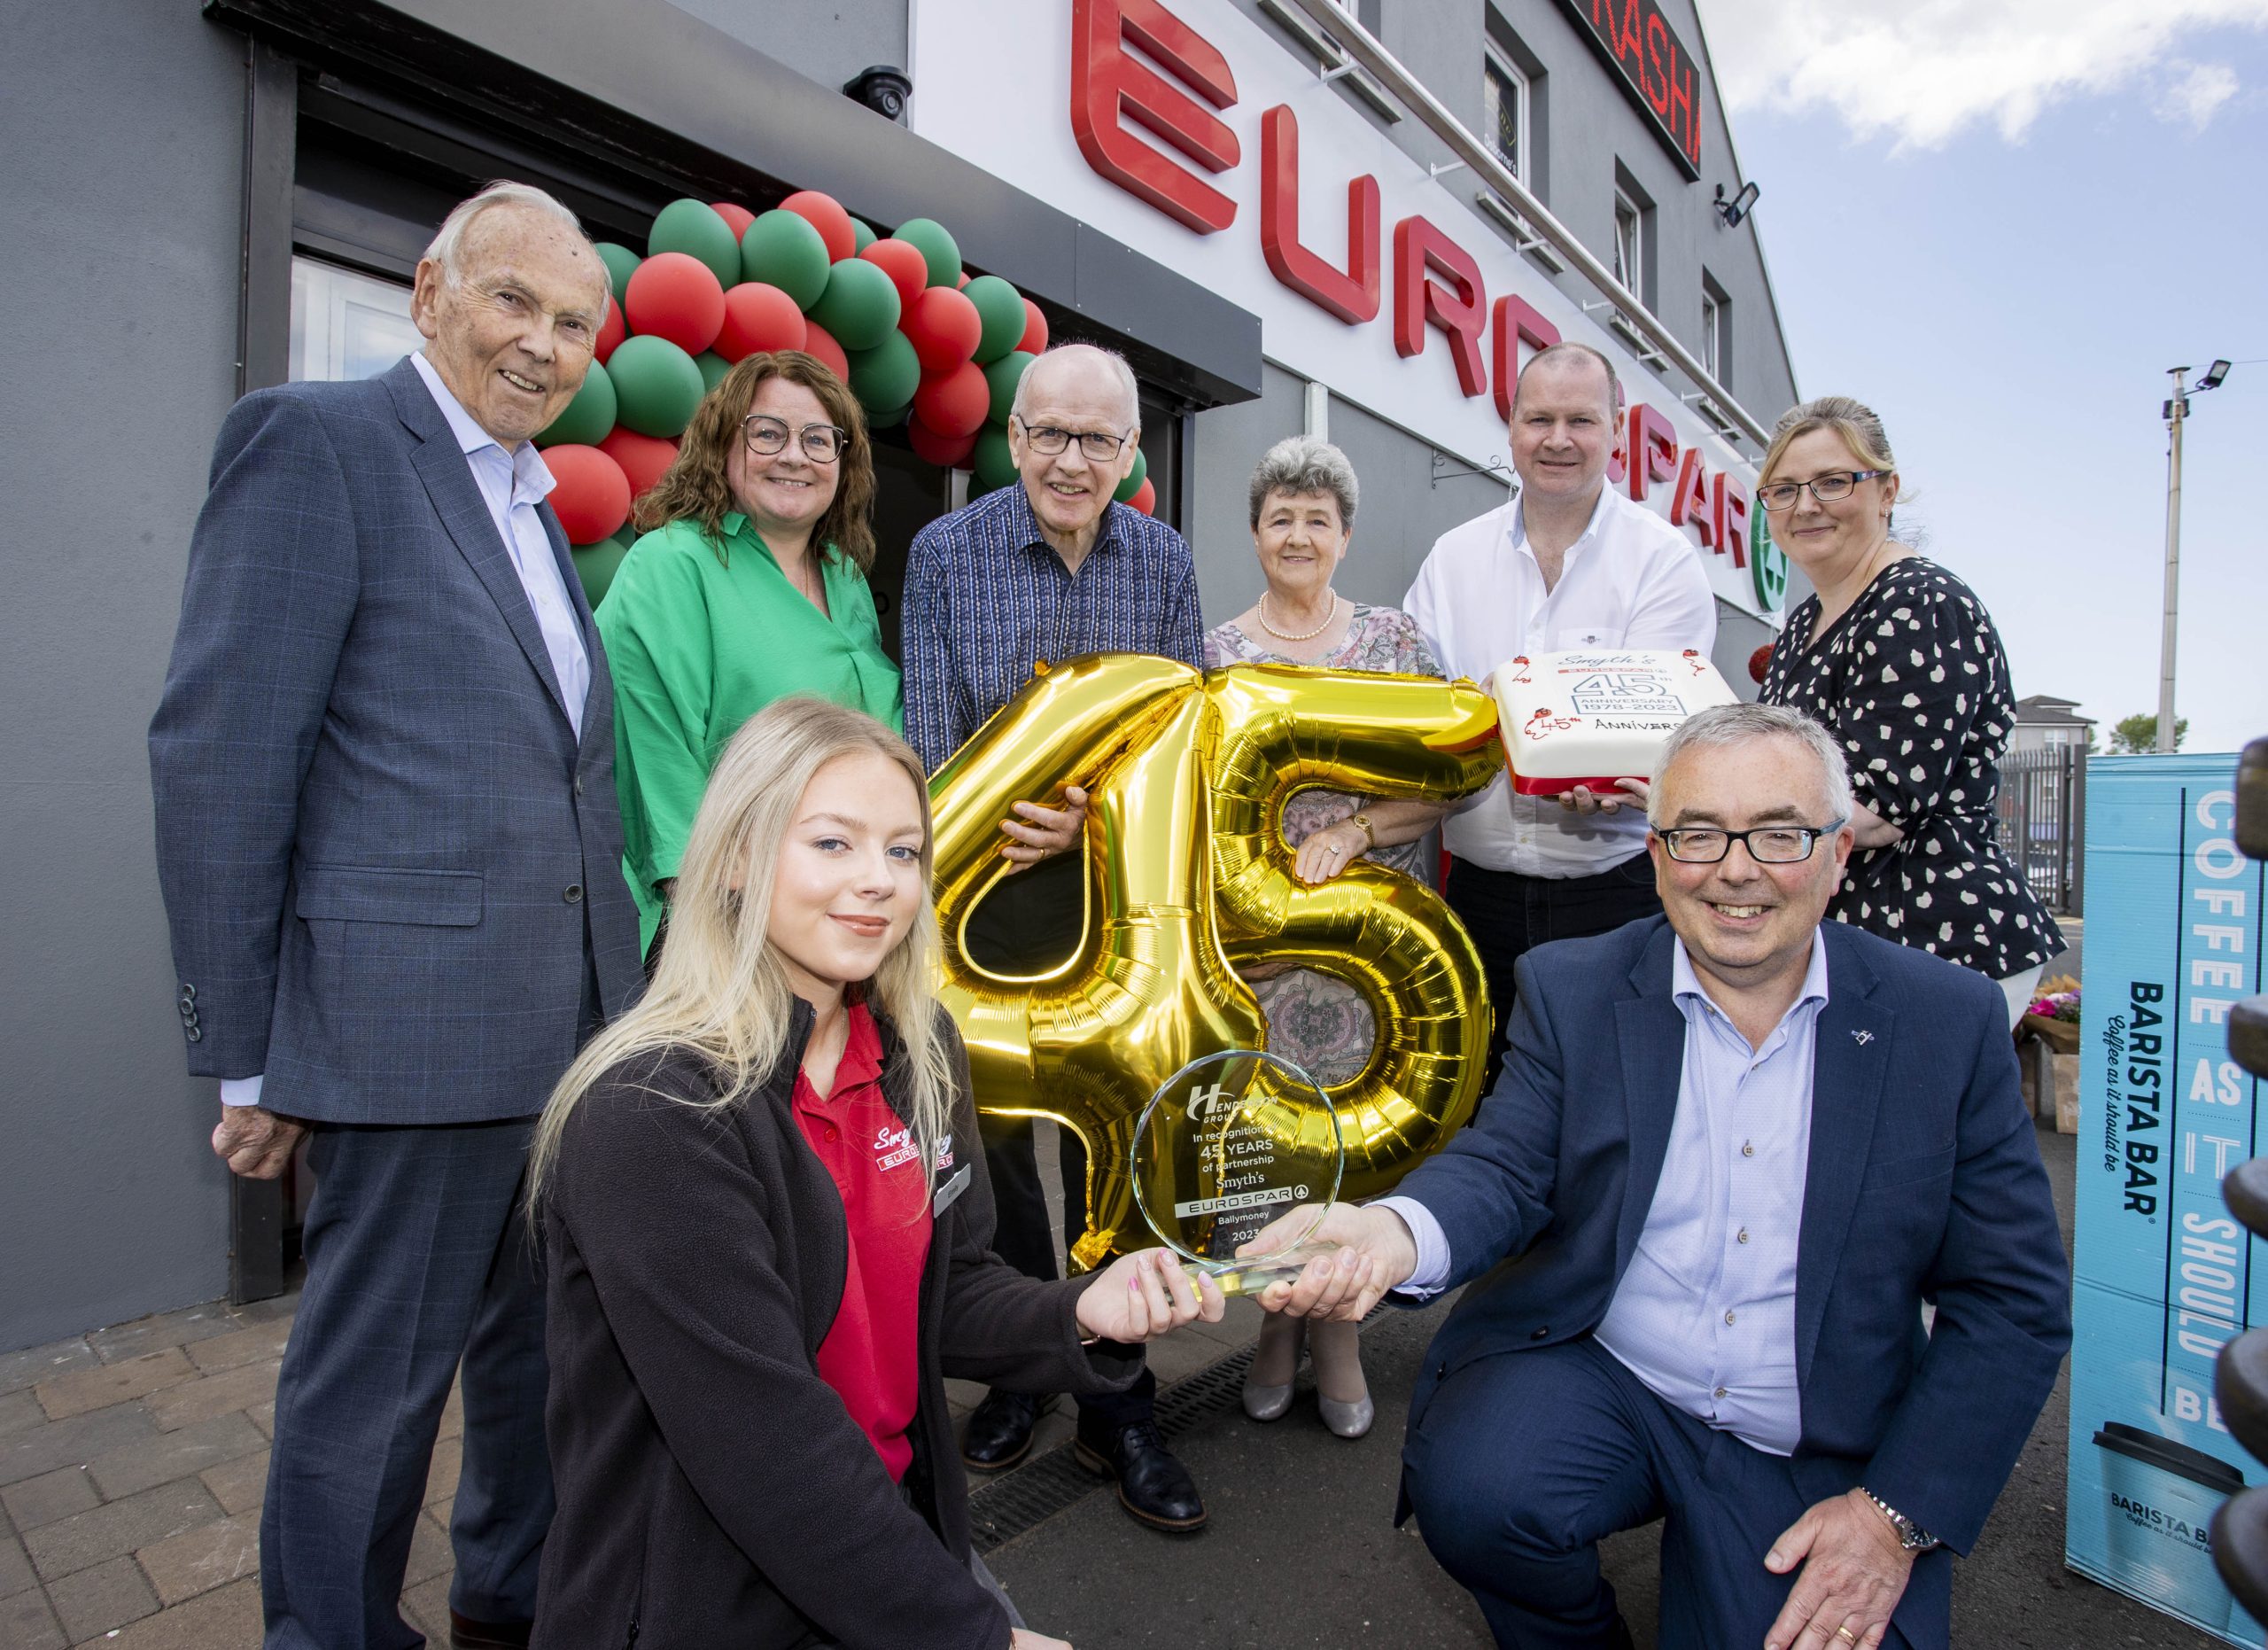 Ballymoney store celebrates 45 years as part of the local community